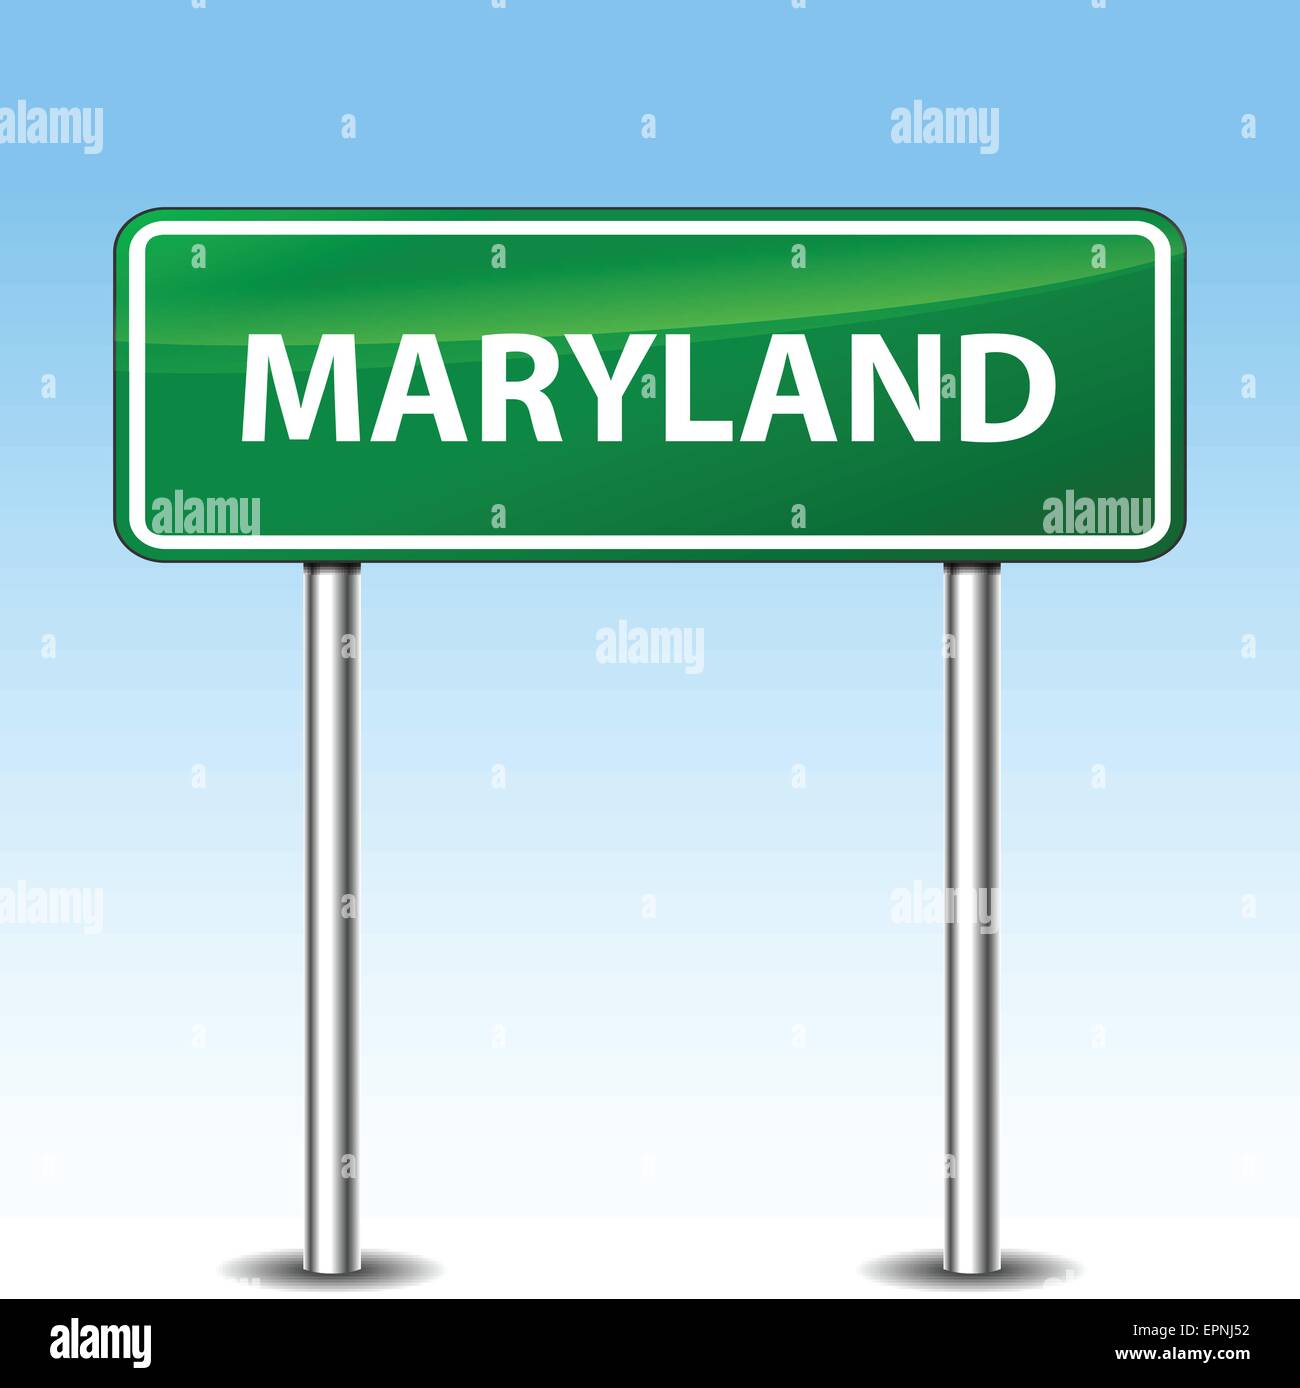 Illustration of maryland green metal road sign Stock Vector